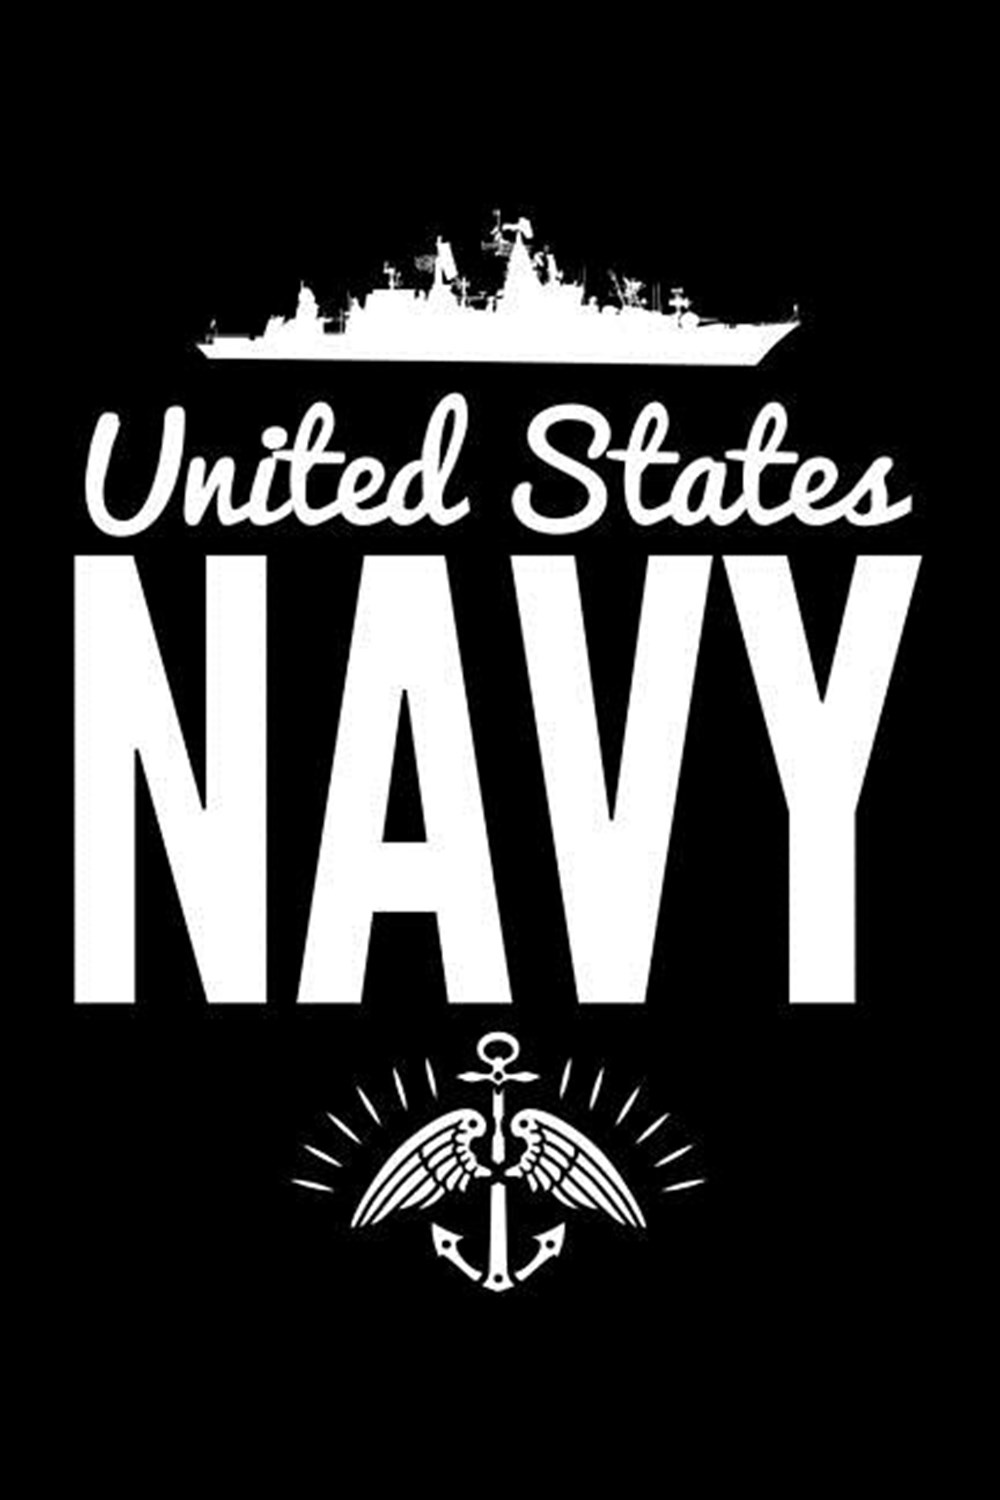 United States Navy Blank Paper Sketch Book - Artist Sketch Pad Journal for Sketching, Doodling, Draw